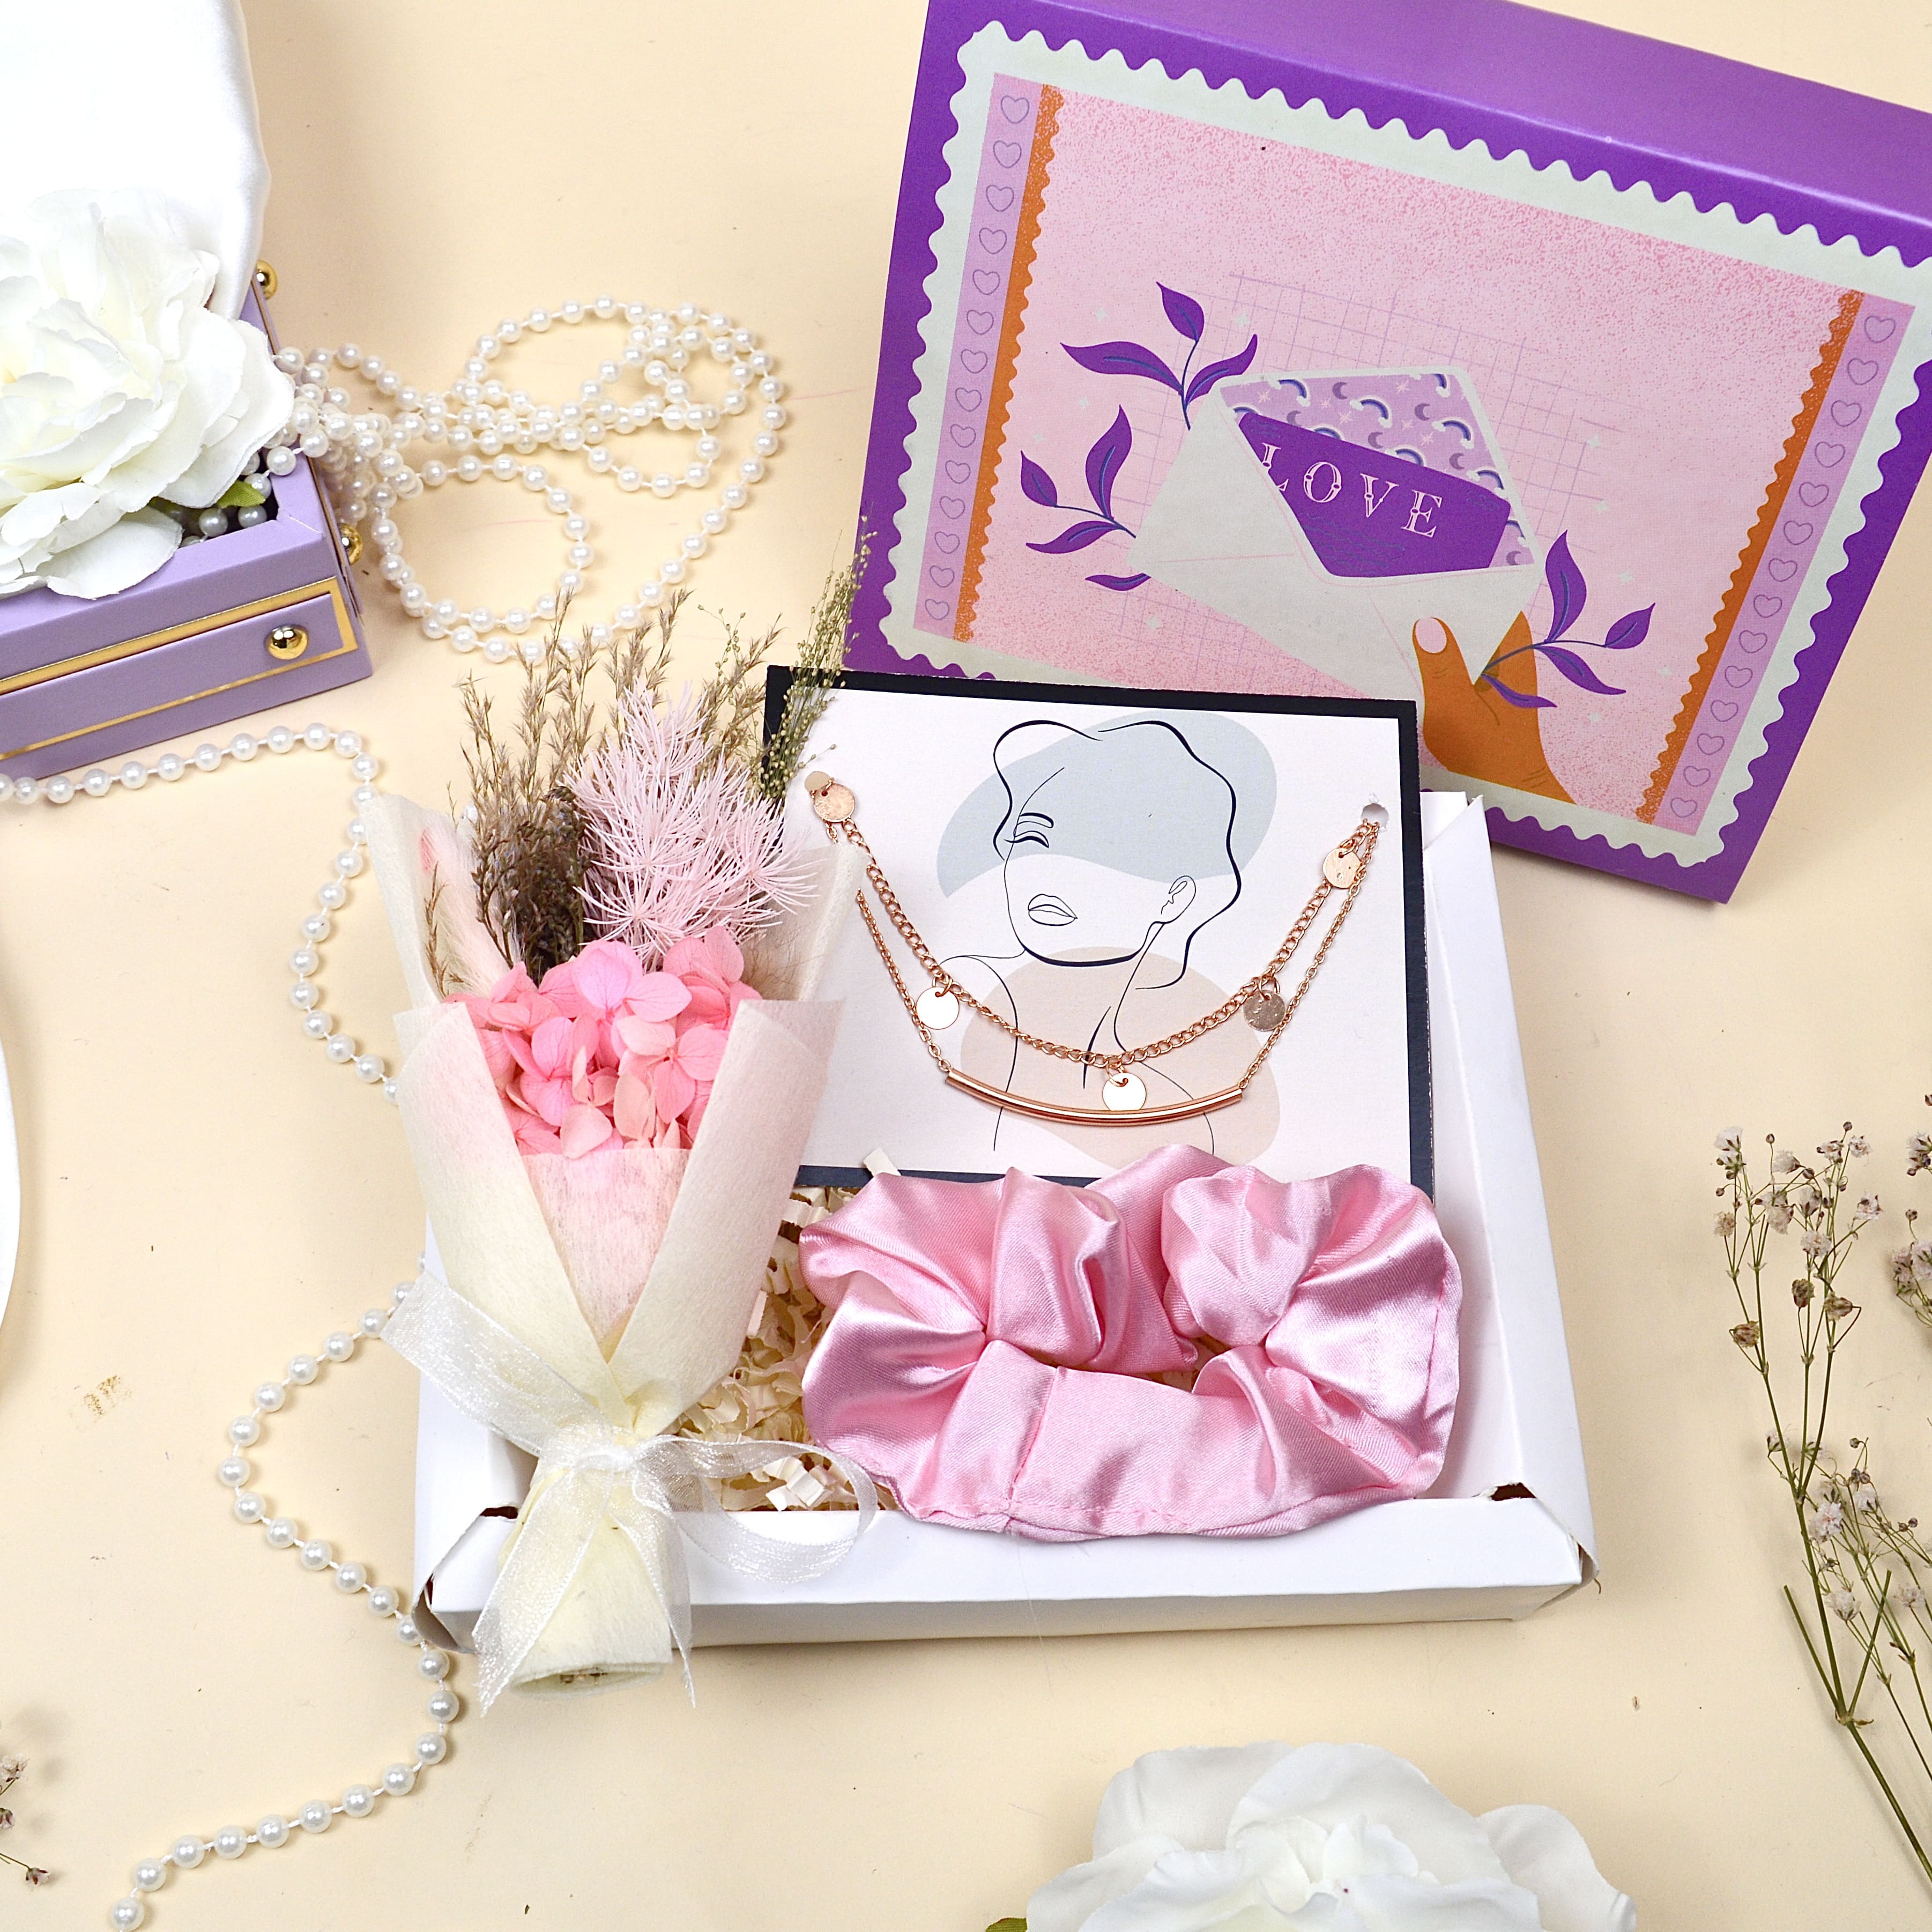 6 Awe-Worthy Bridesmaid Gift Ideas They'll Brag About